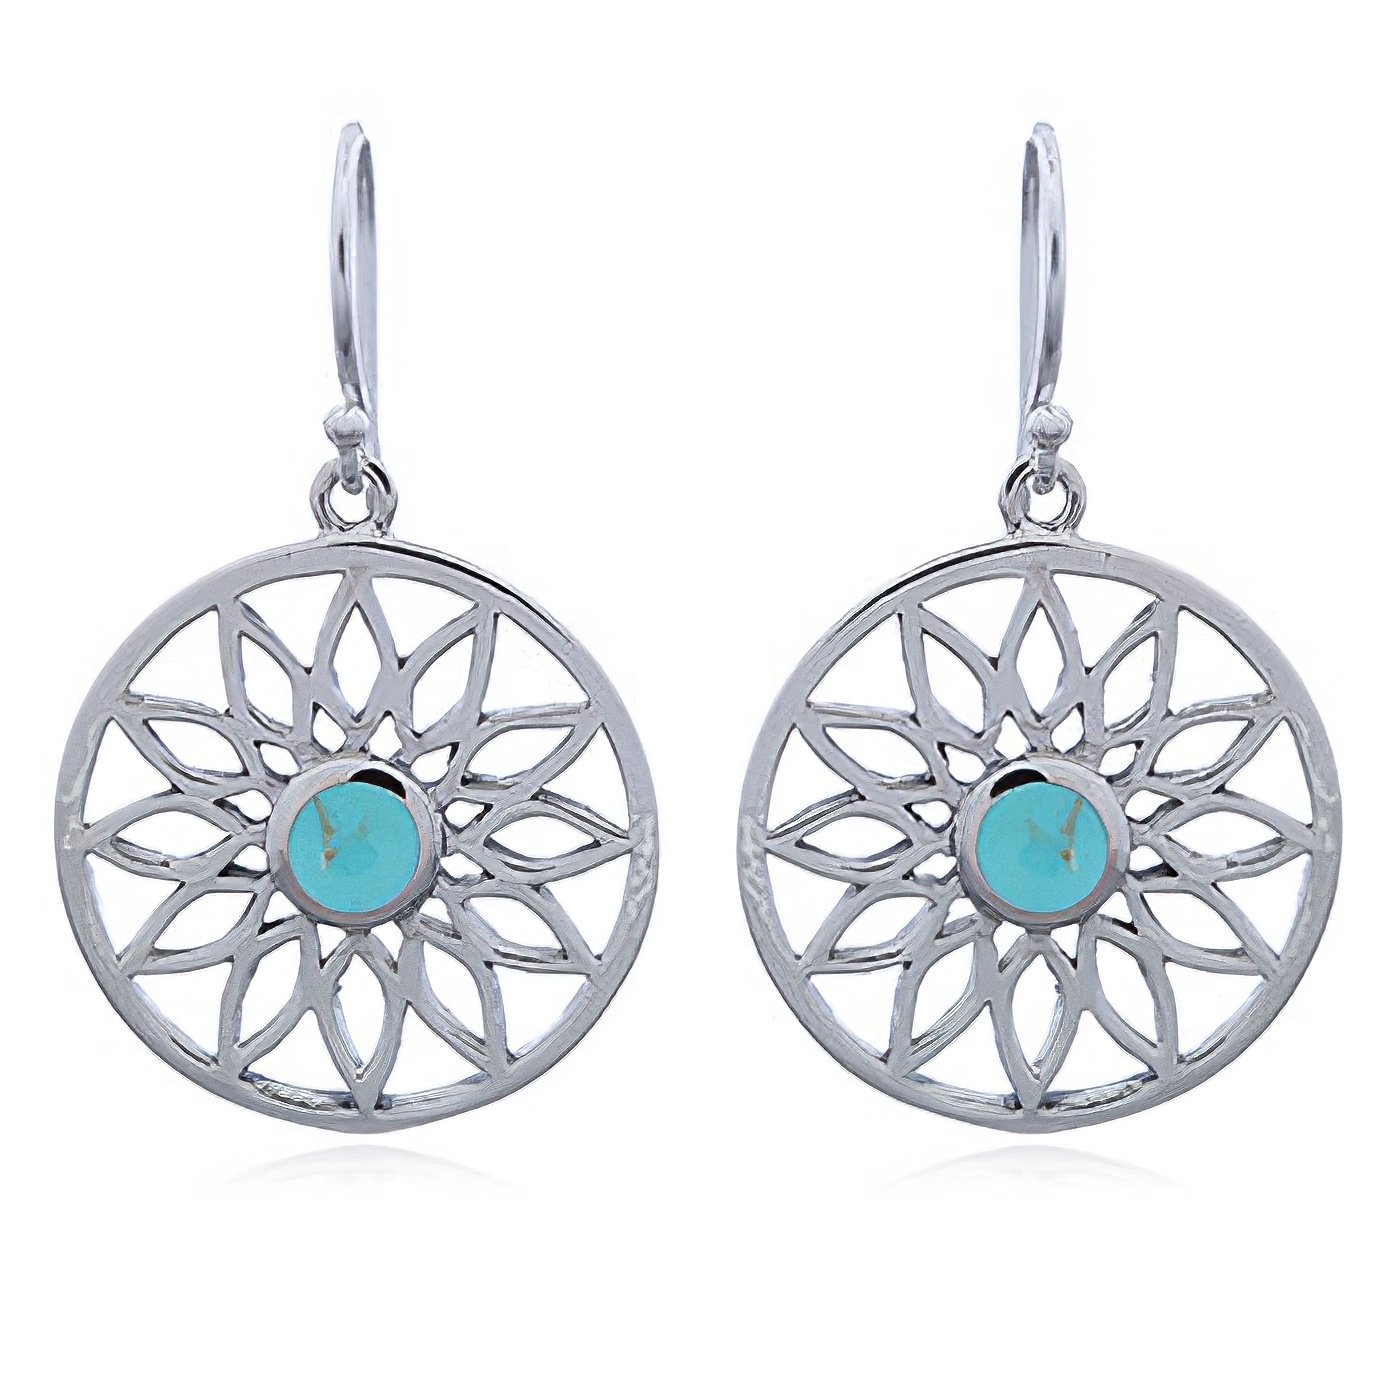 Round Silver Flower Earrings with Howlite Turquoise by BeYindi 